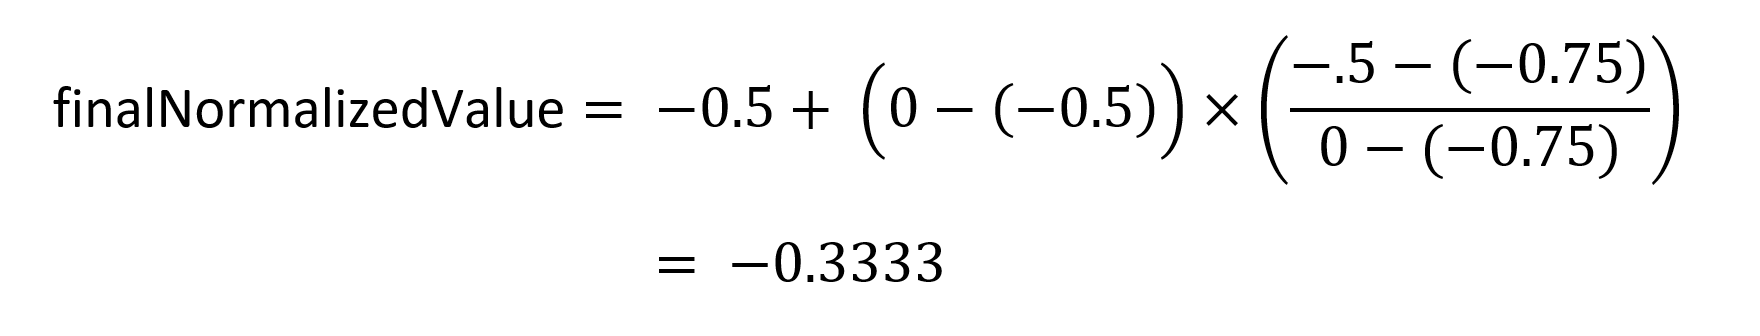 example of finalNormalizedValue calculation